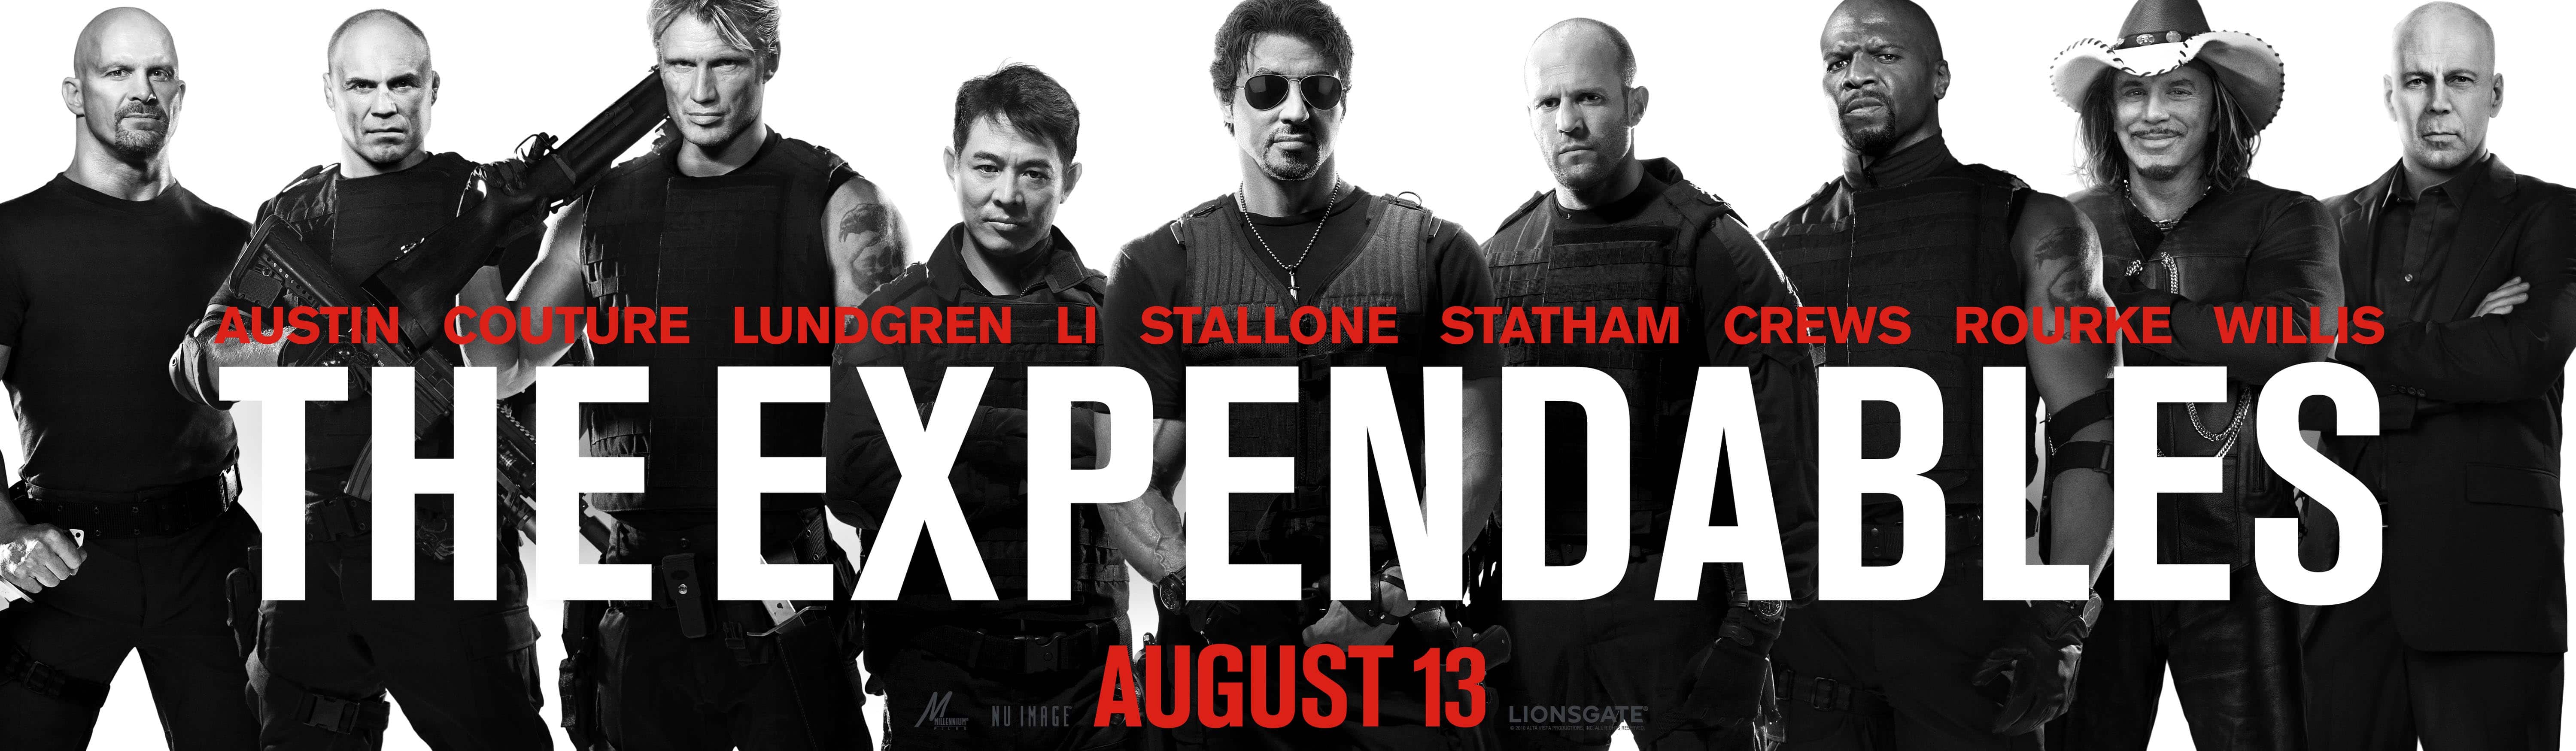 The-Expendables-Poster 